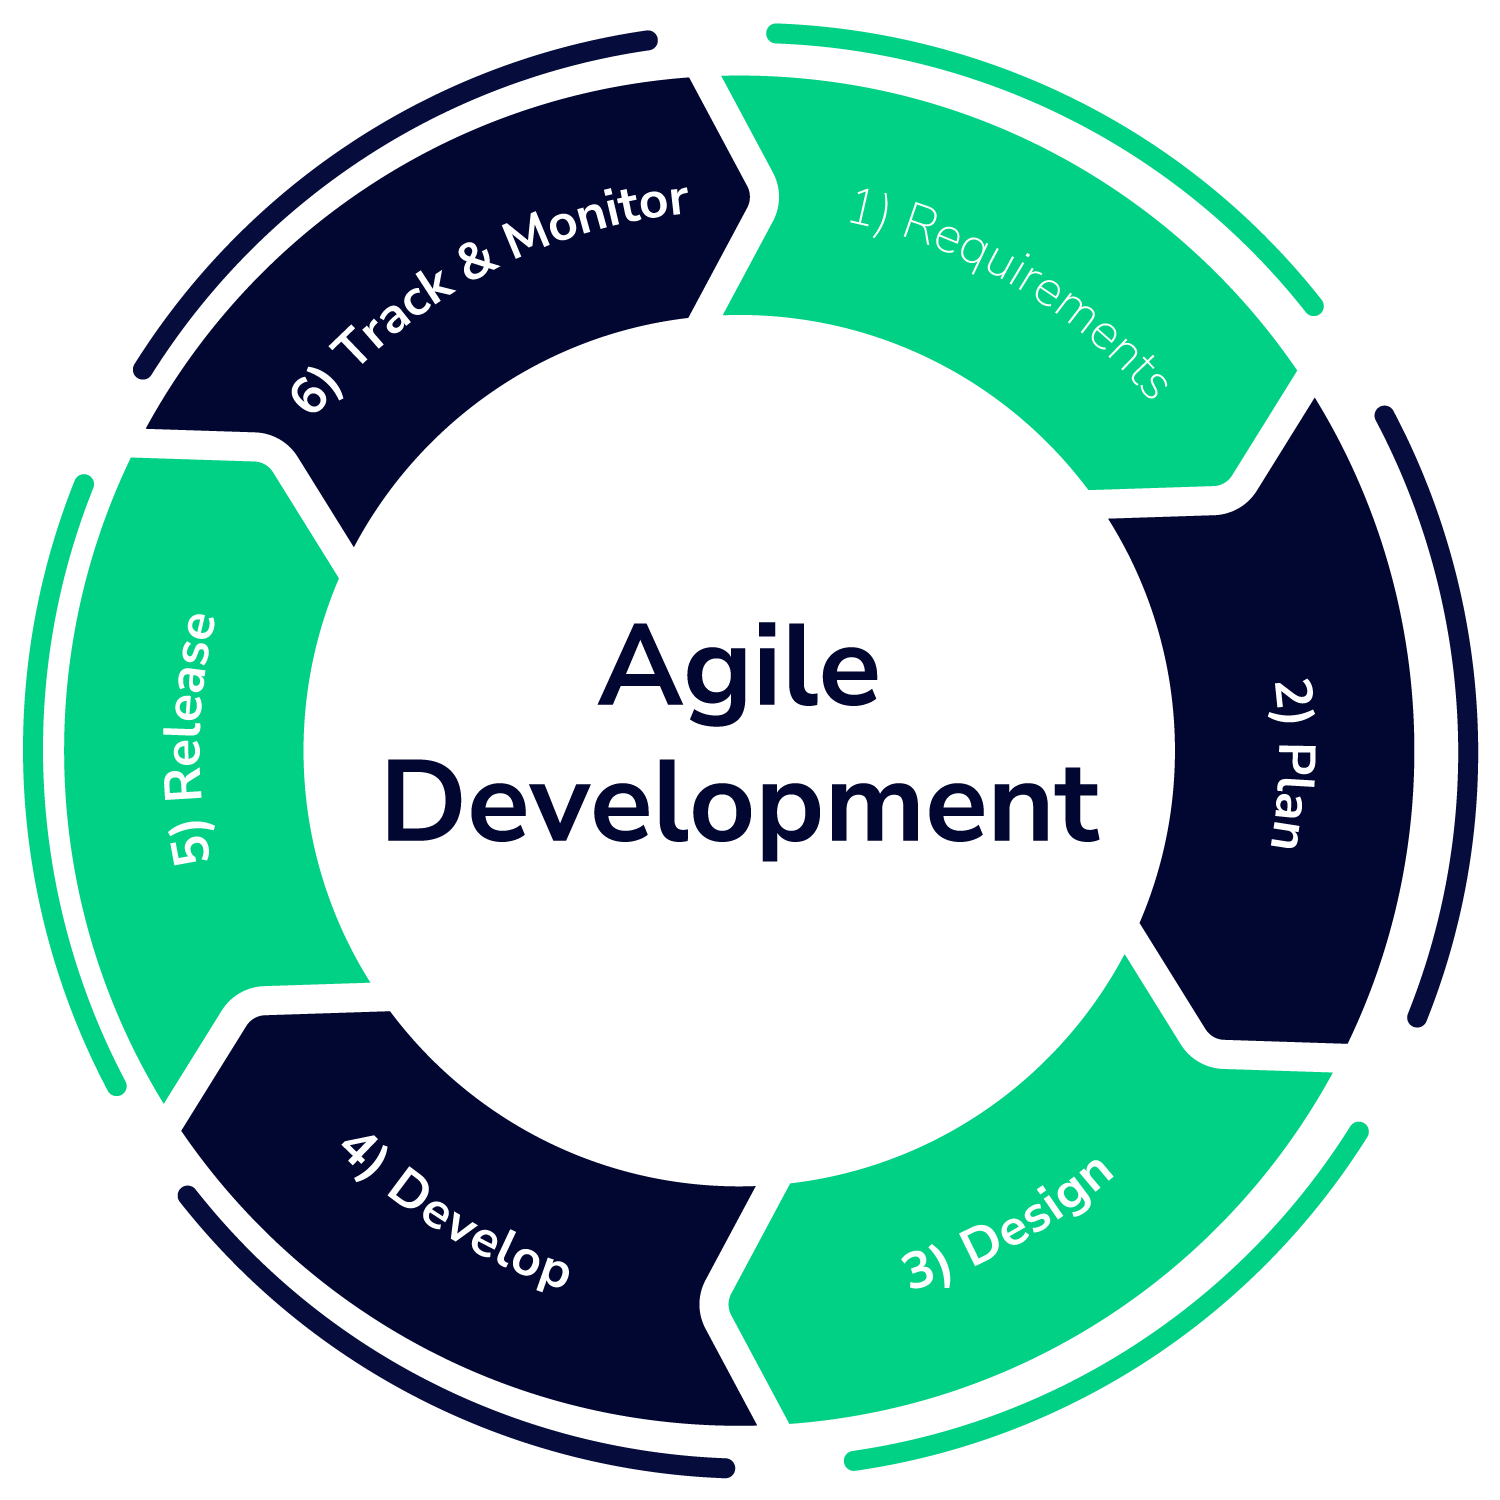 Agile Methodology steps in green and blue